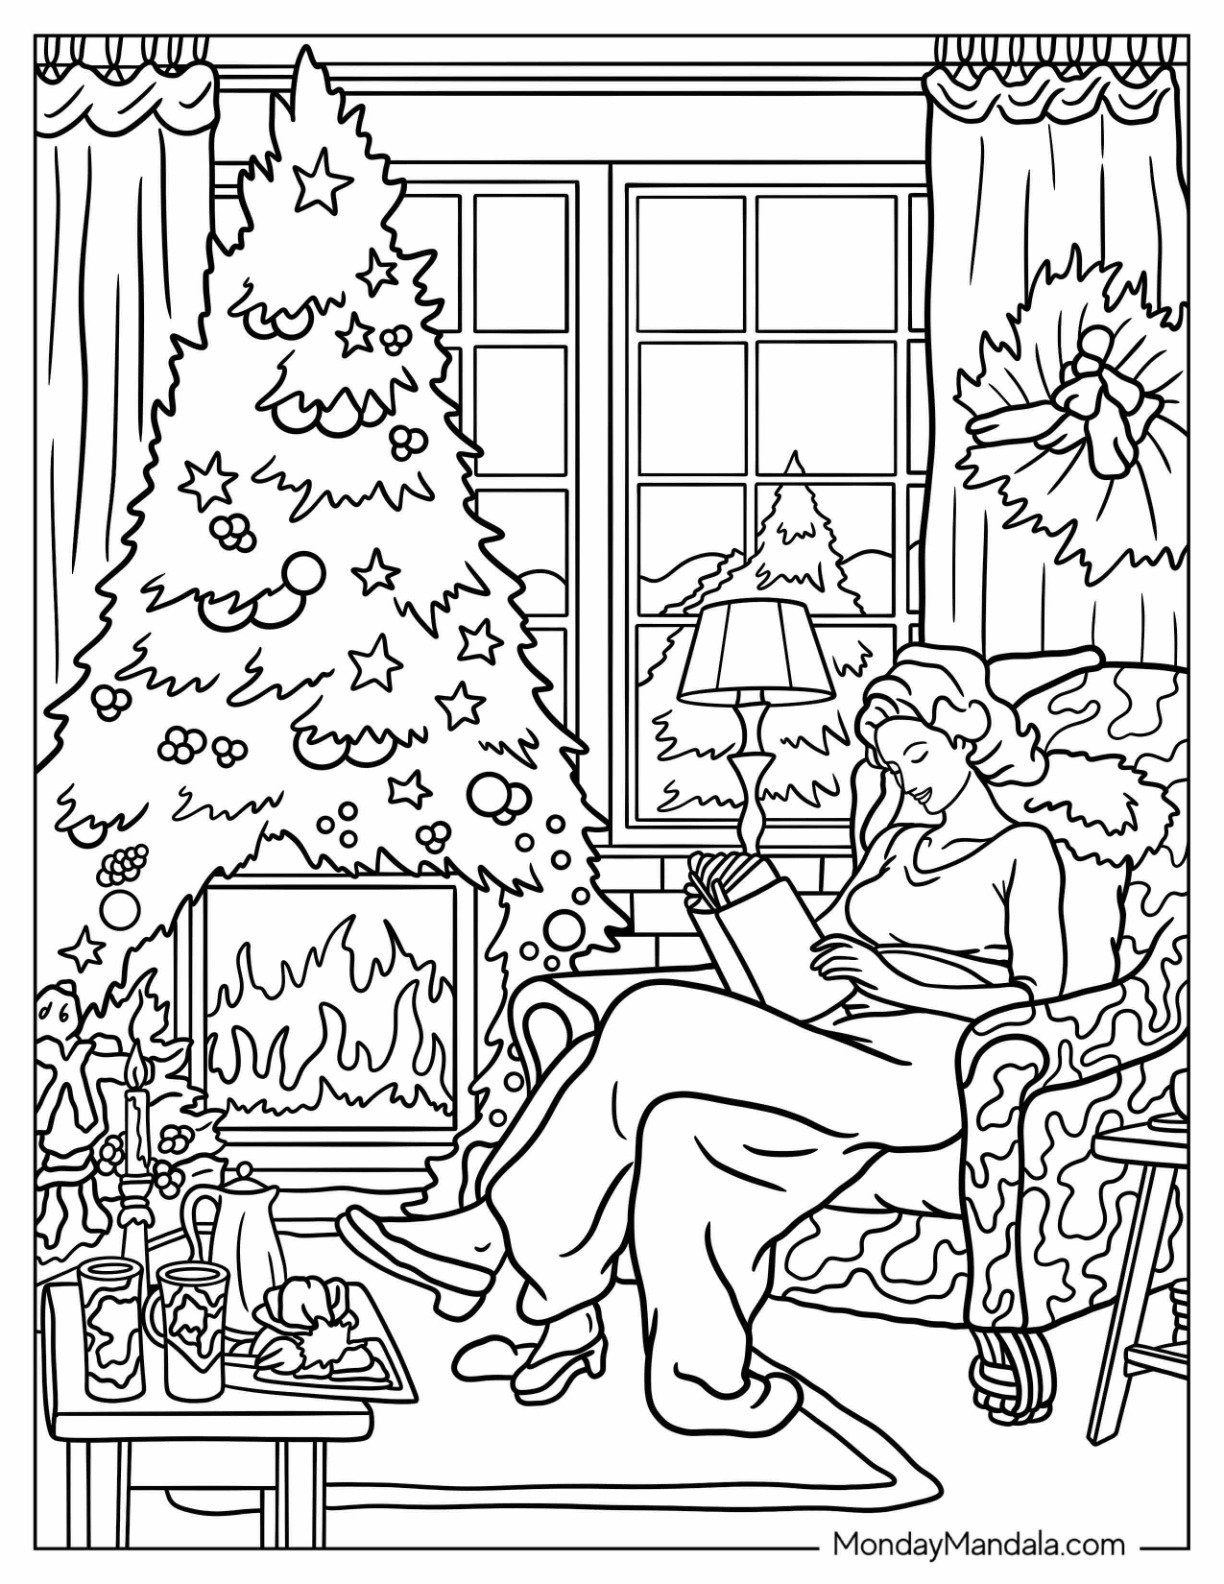 32 Christmas Coloring Pages For Adults (Free Printables)